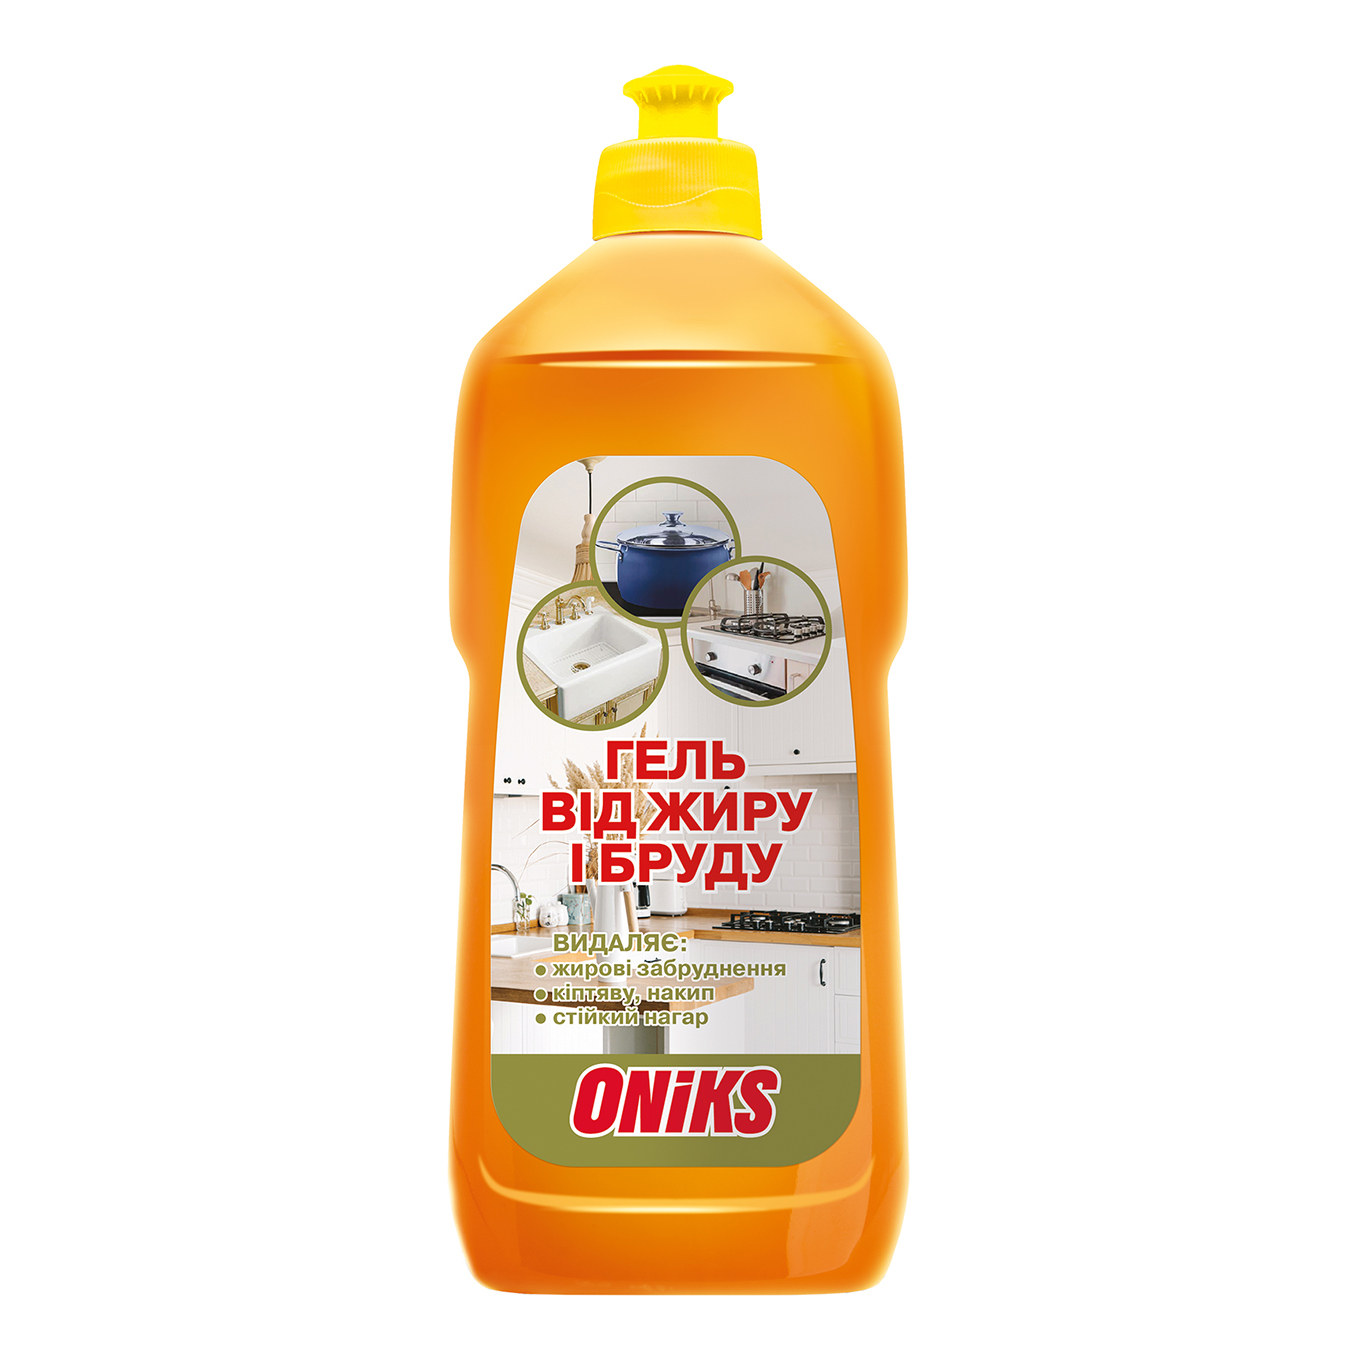 Oniks gel for cleaning the kitchen from grease and dirt 500 ml